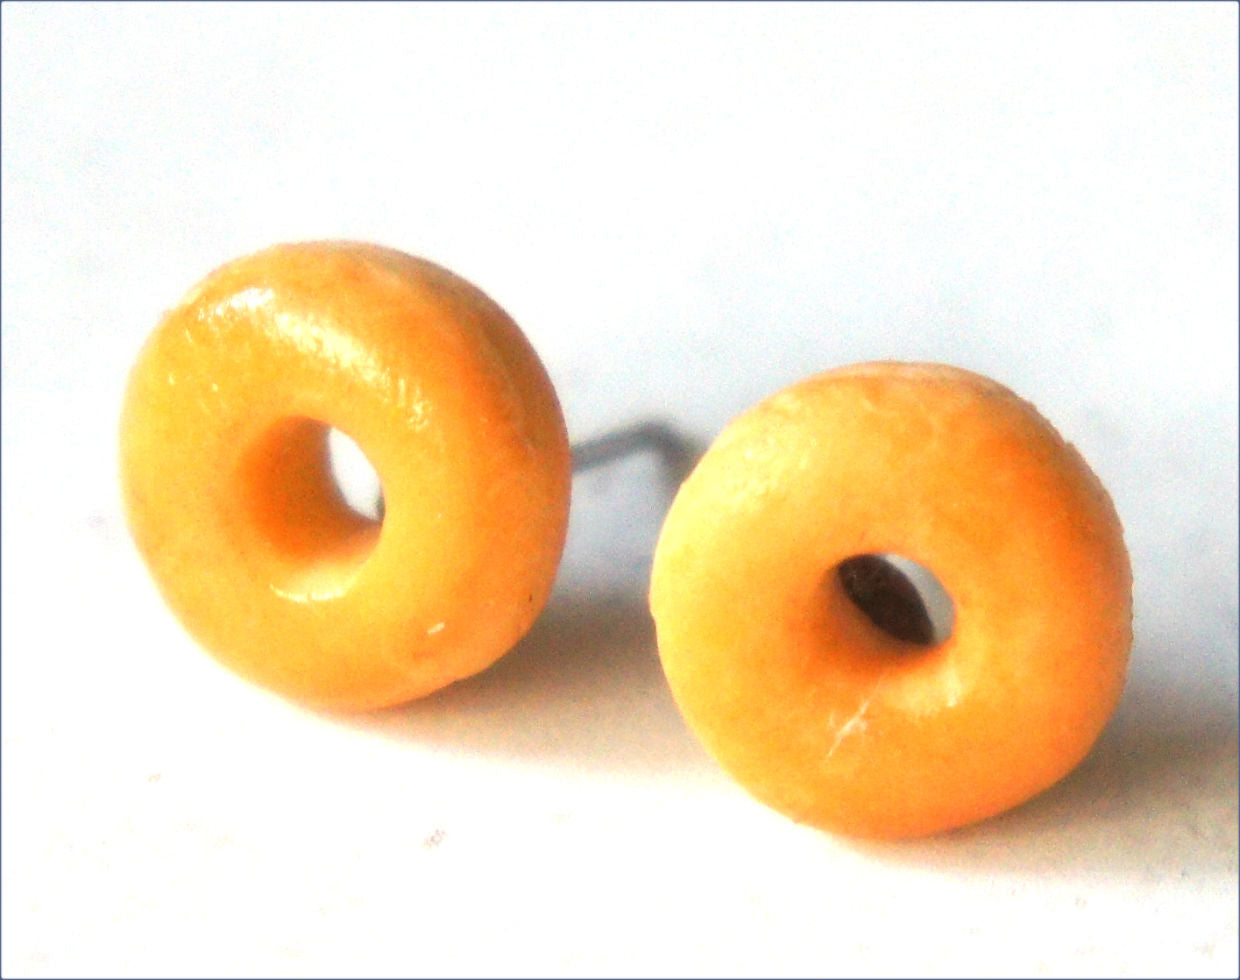 Glazed Donuts Stud Earrings - Jillicious charms and accessories